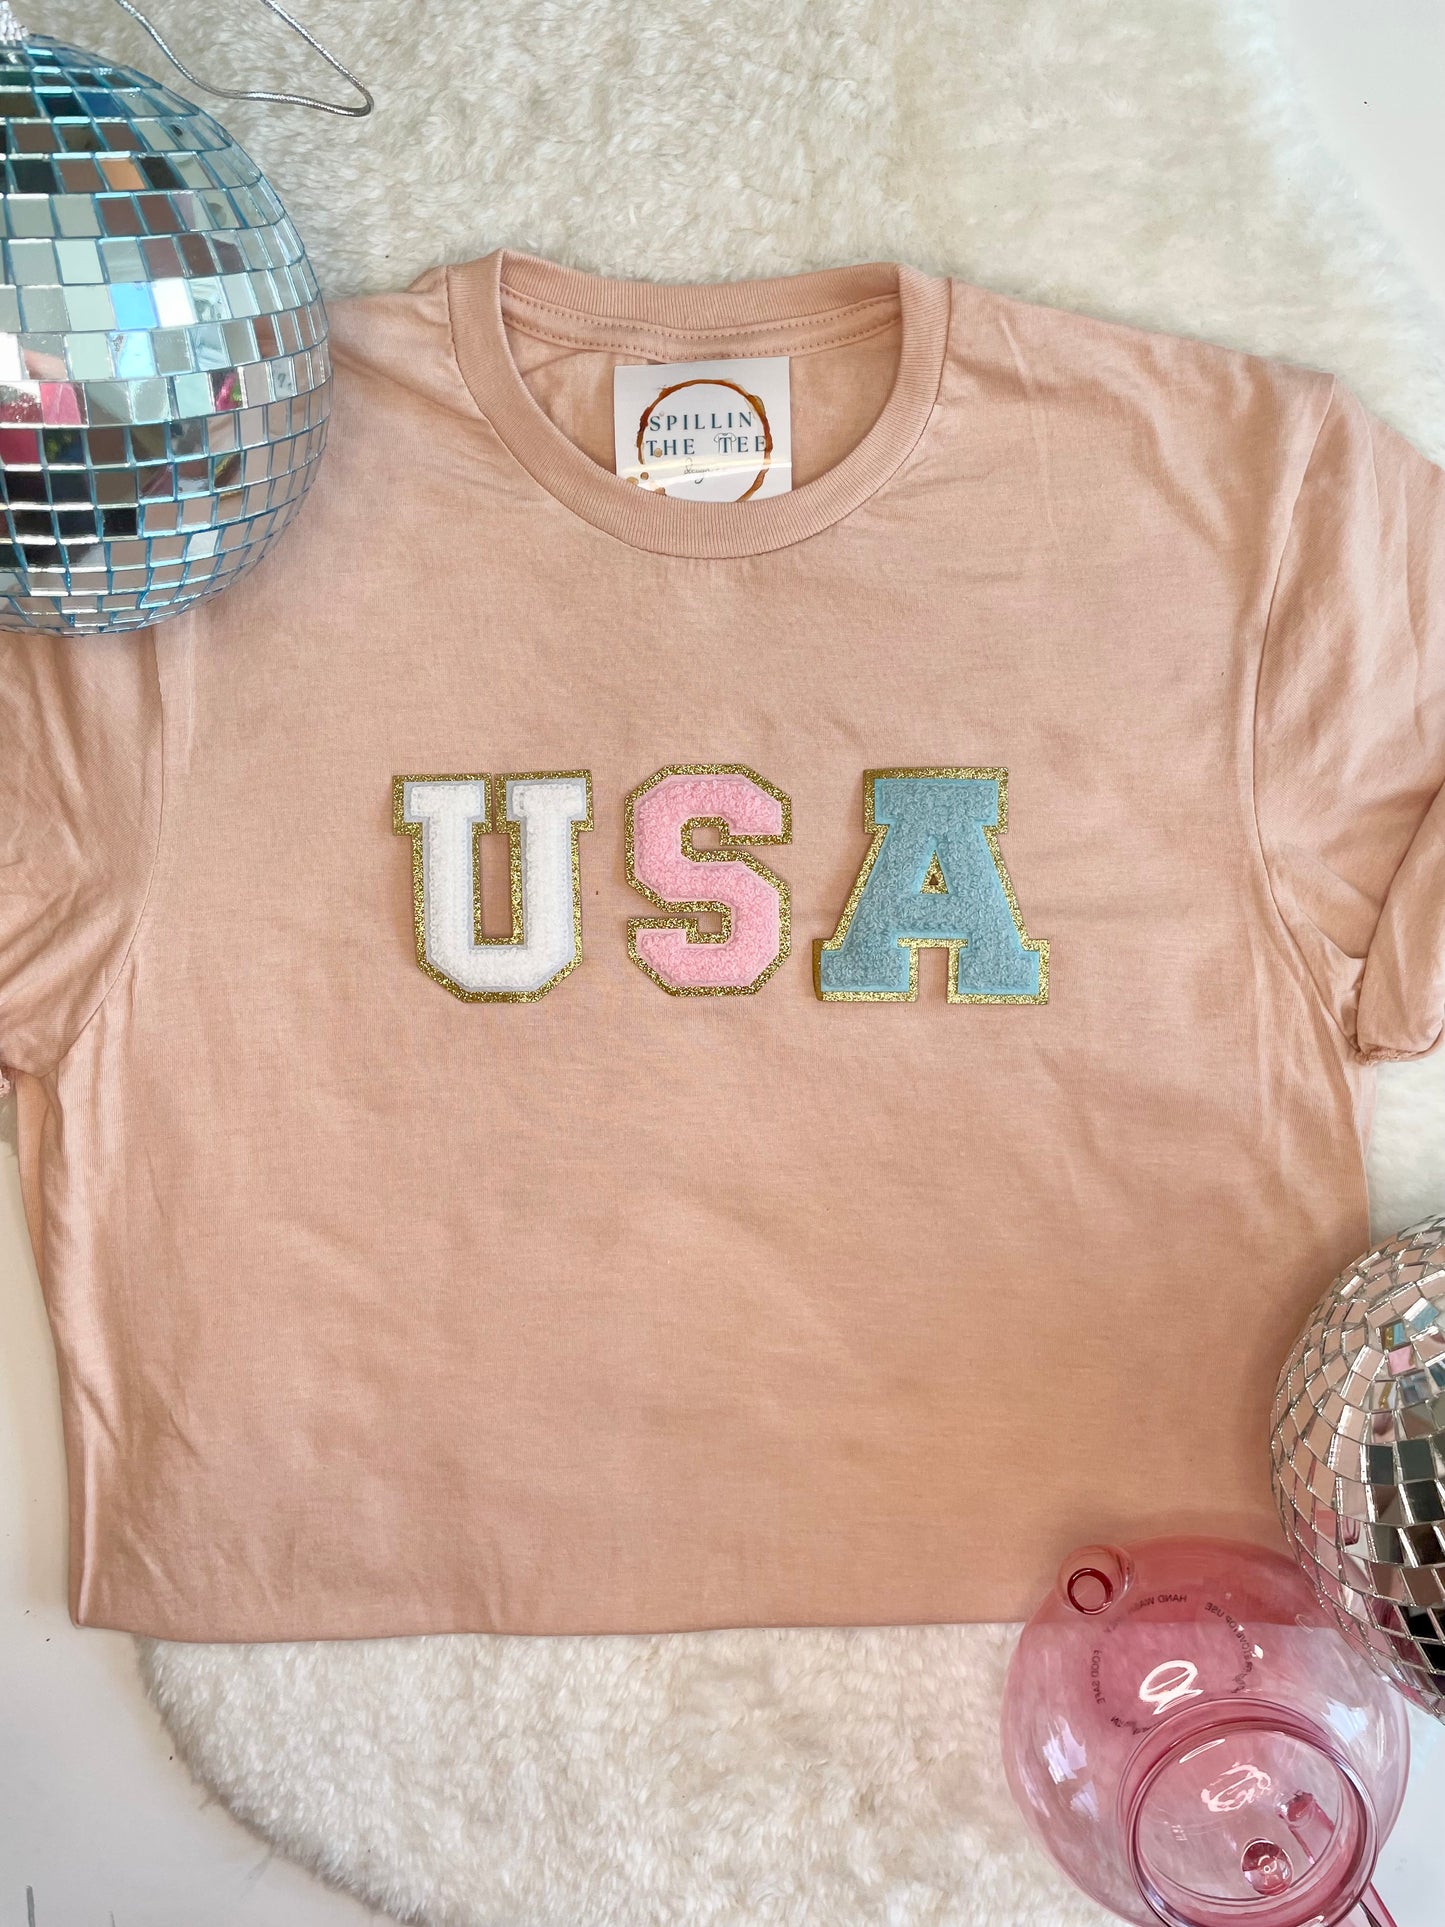 USA pastel white, pink and blue varsity letter Adult Tees